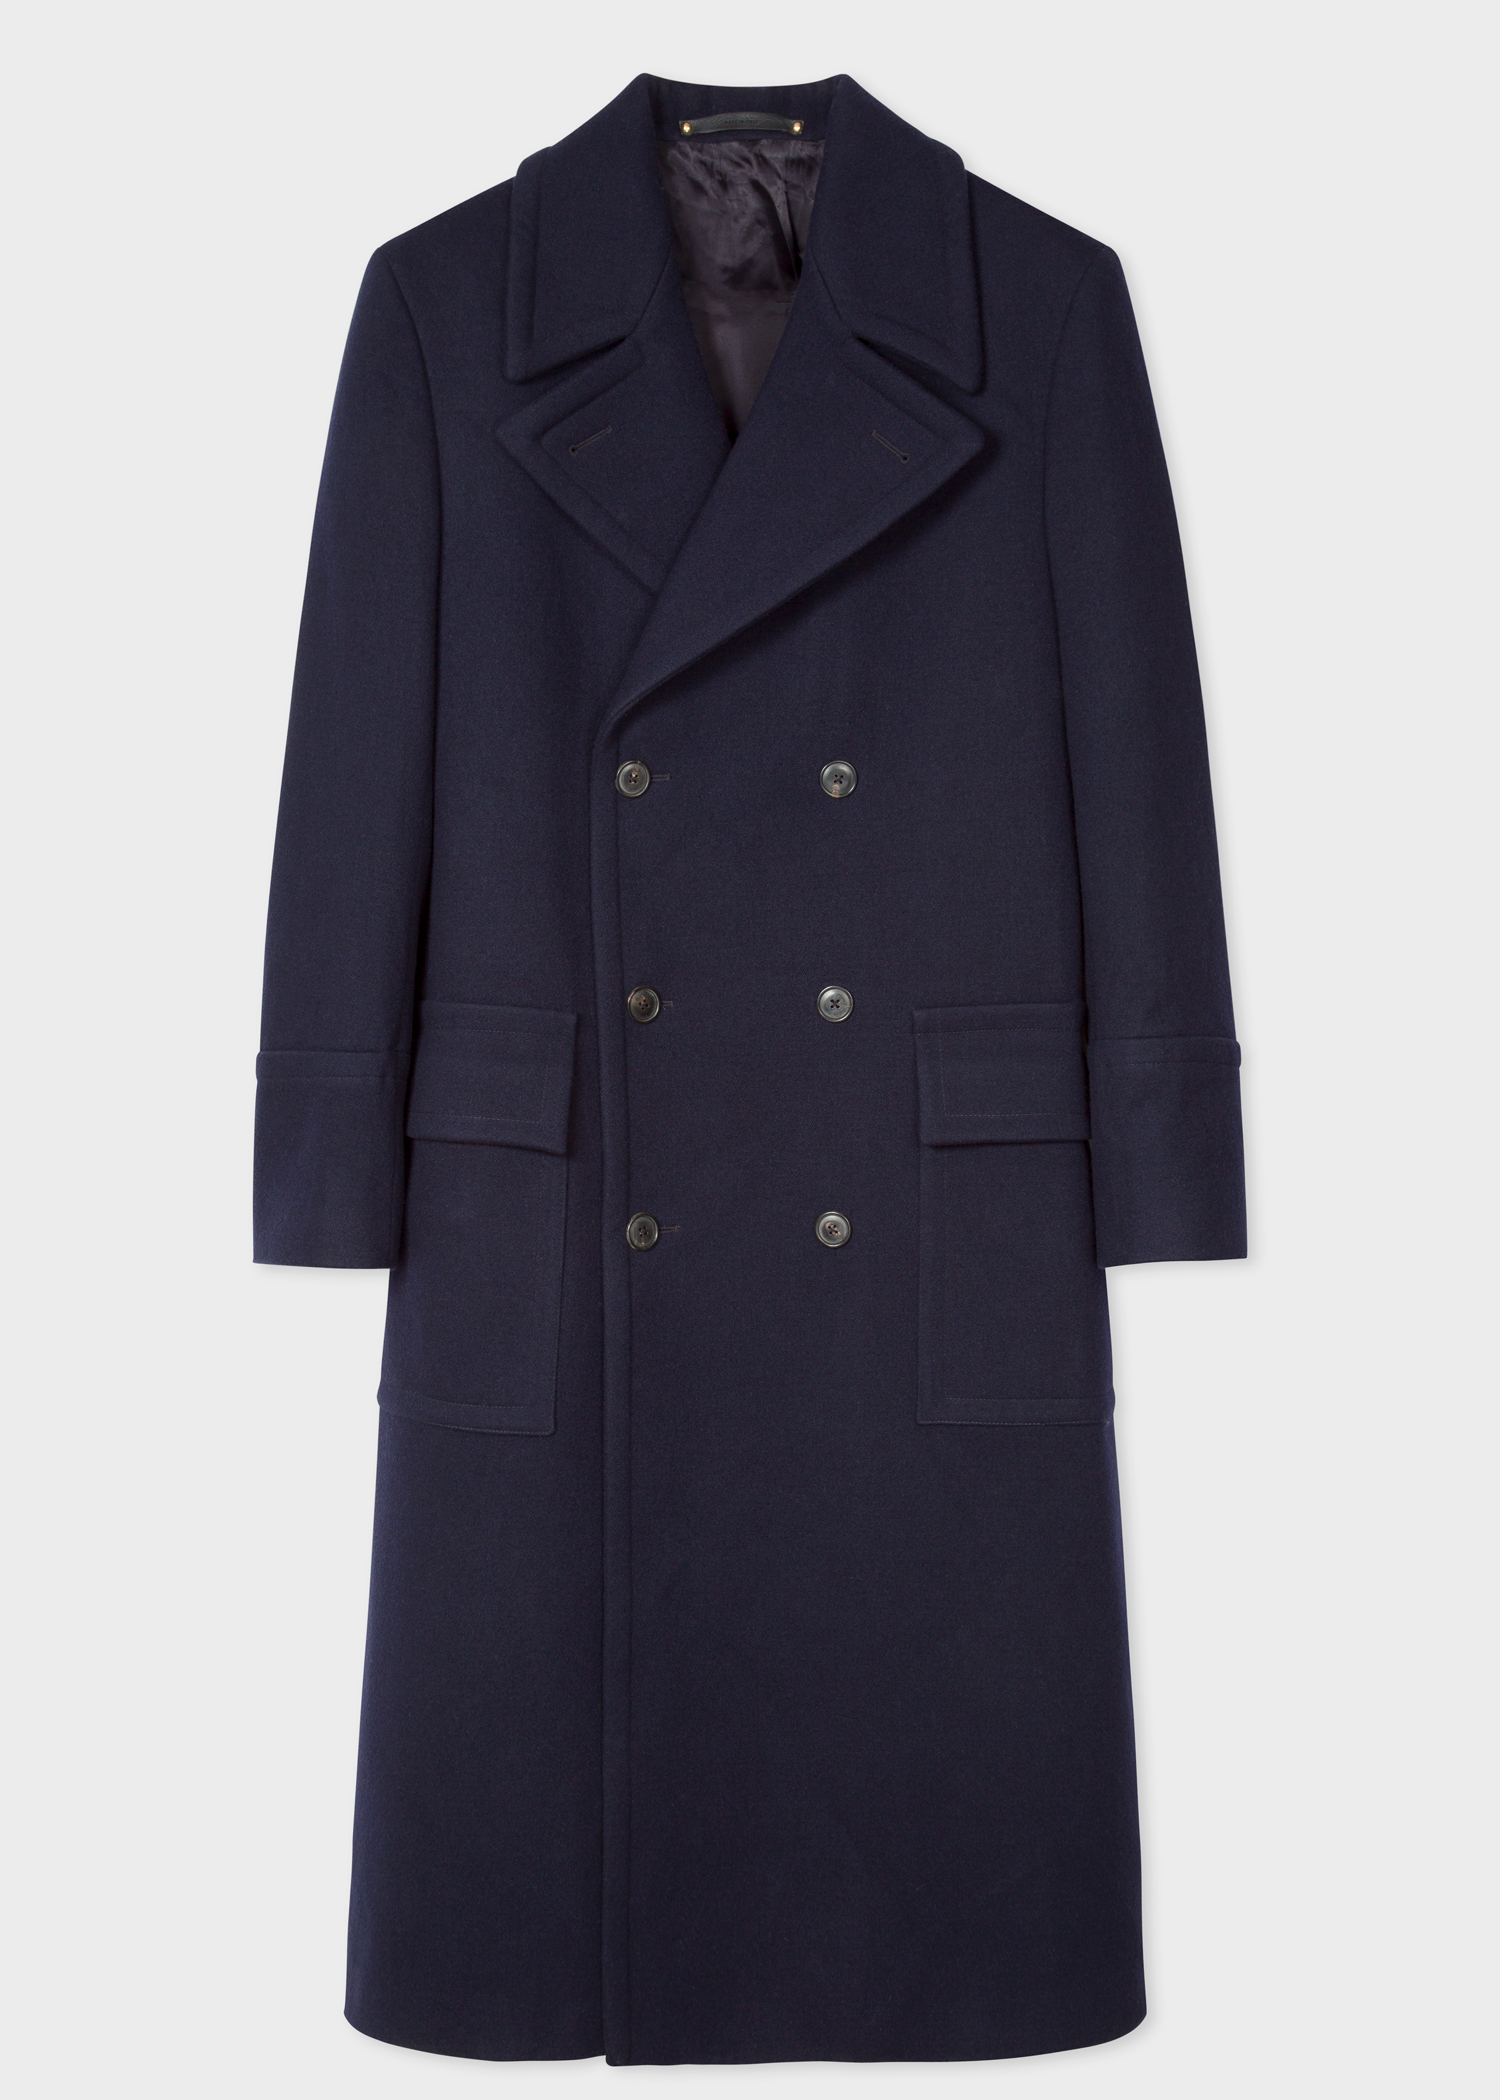 Men's Navy Double-Breasted Wool-Blend Overcoat - Paul Smith